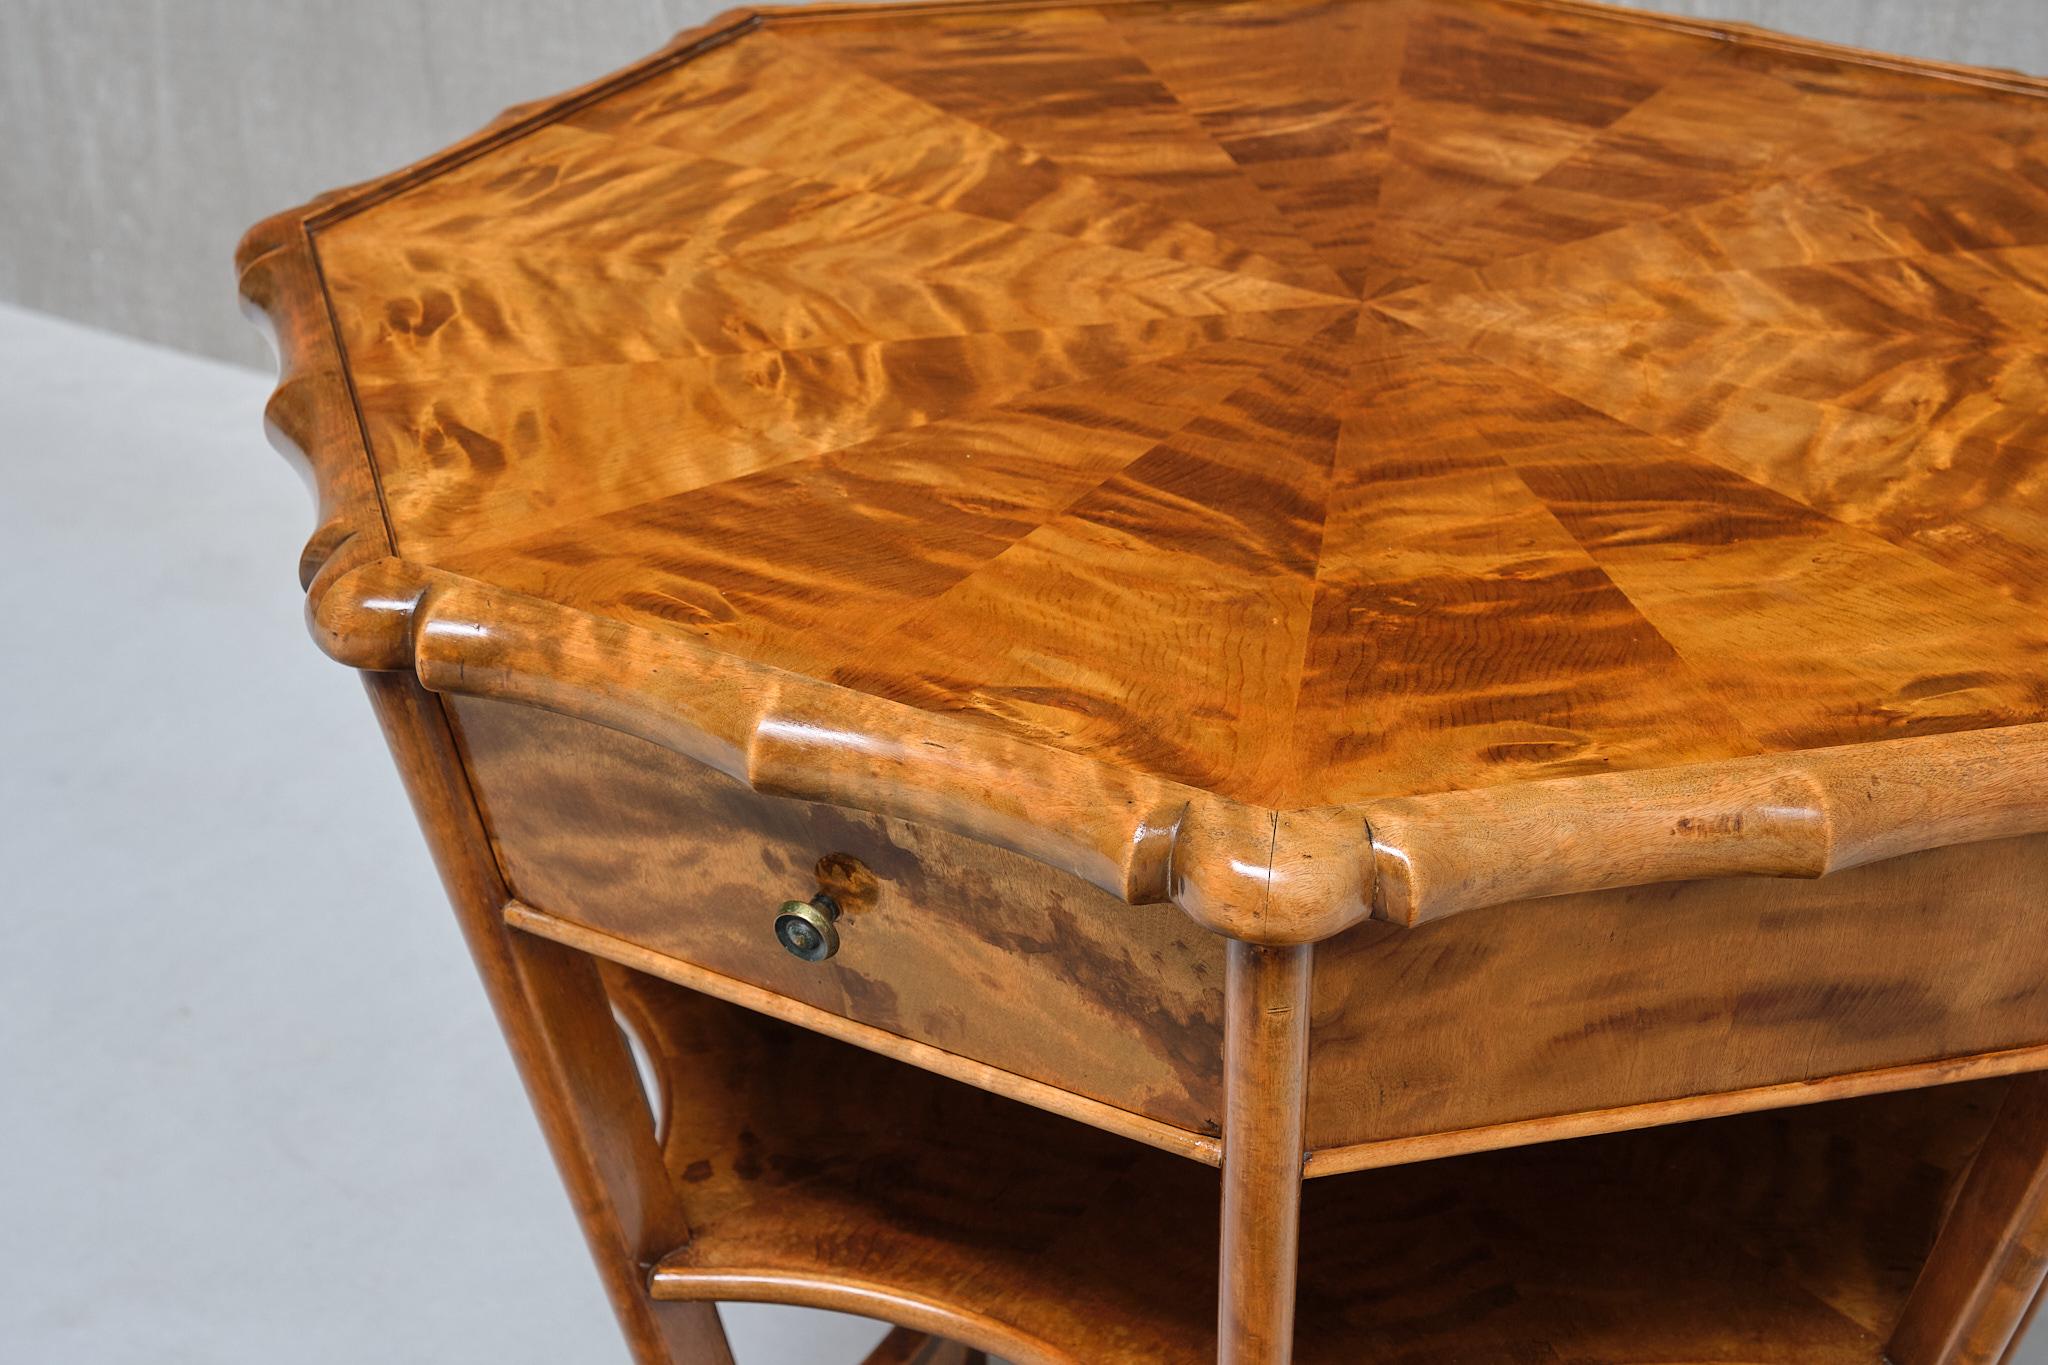 Exceptional Expressionist Octagonal Center Table in Flamed Birch, Germany, 1920s For Sale 1